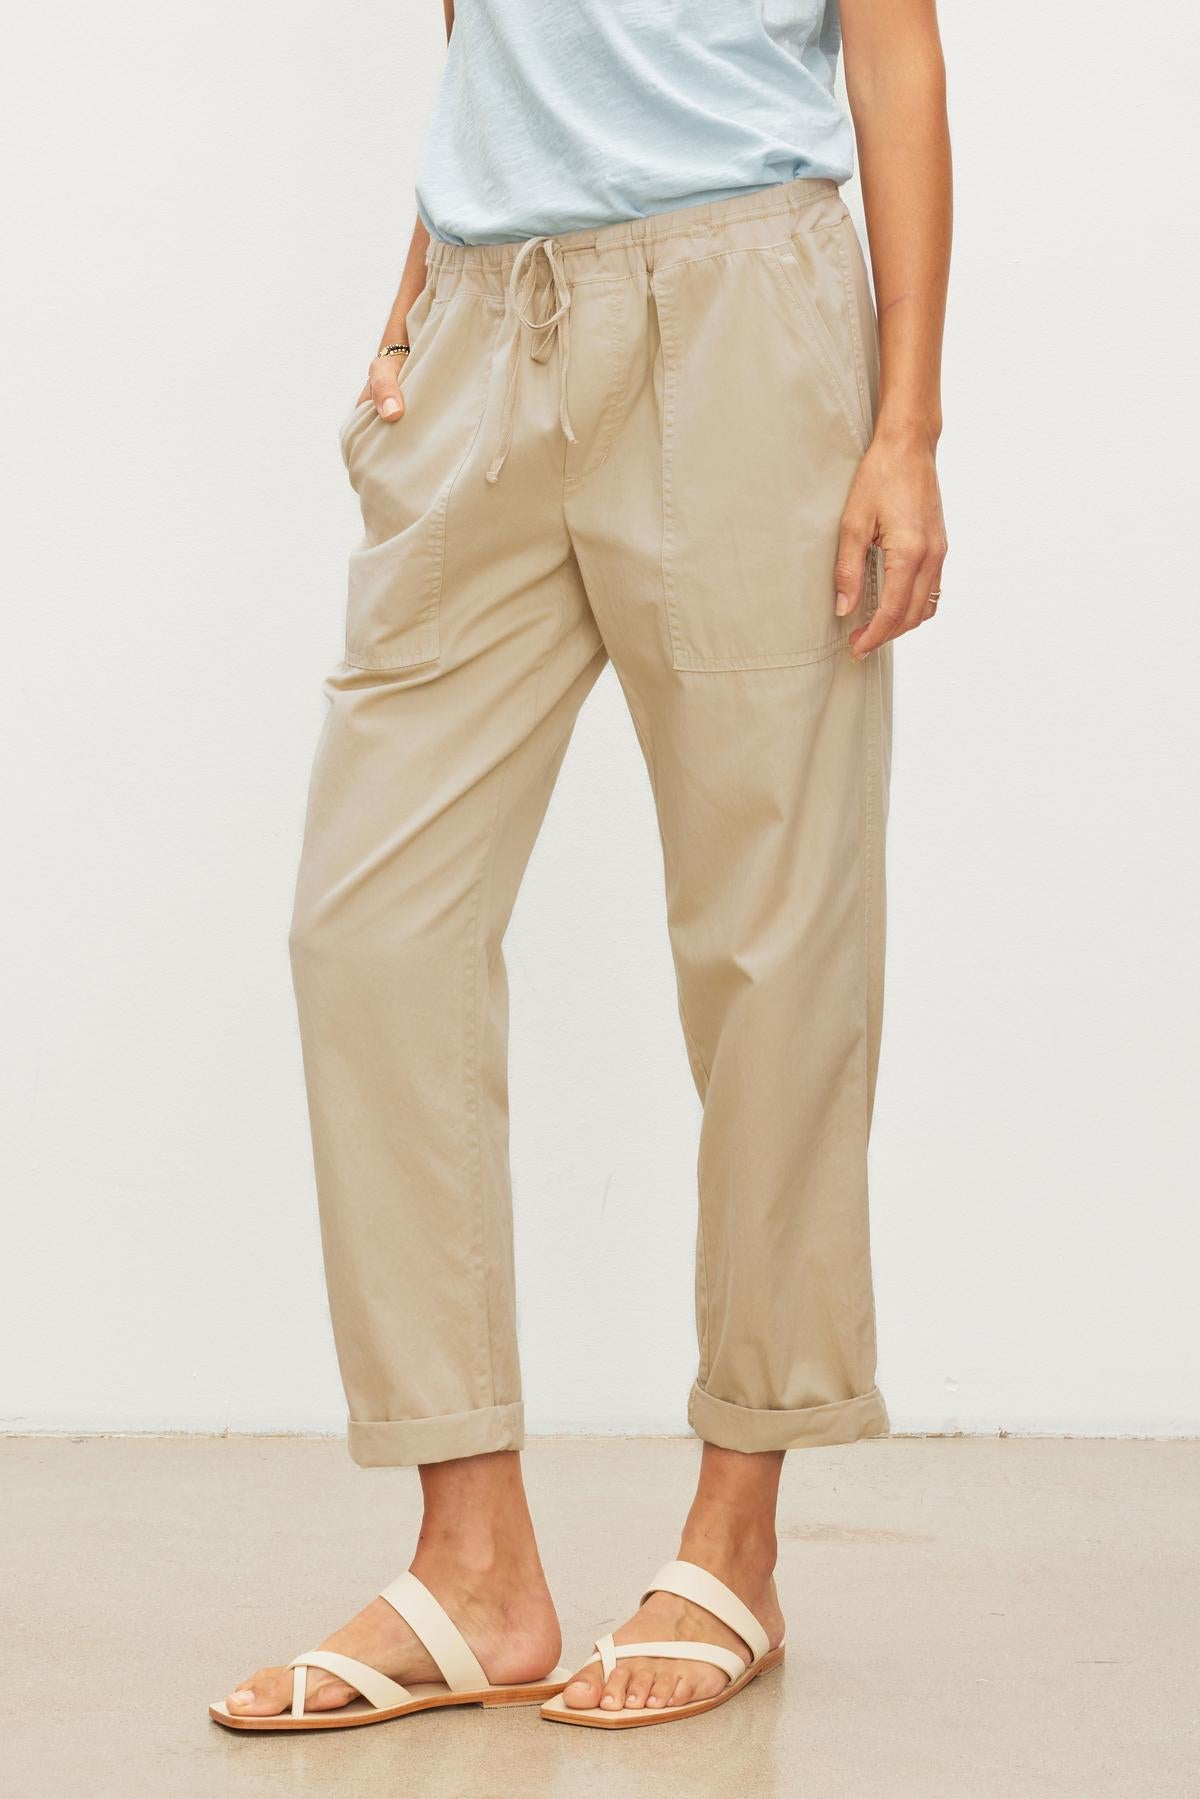 A woman wearing a tan shirt and Velvet by Graham & Spencer's MISTY COTTON TWILL PANT with an elastic waist.-36026026000577